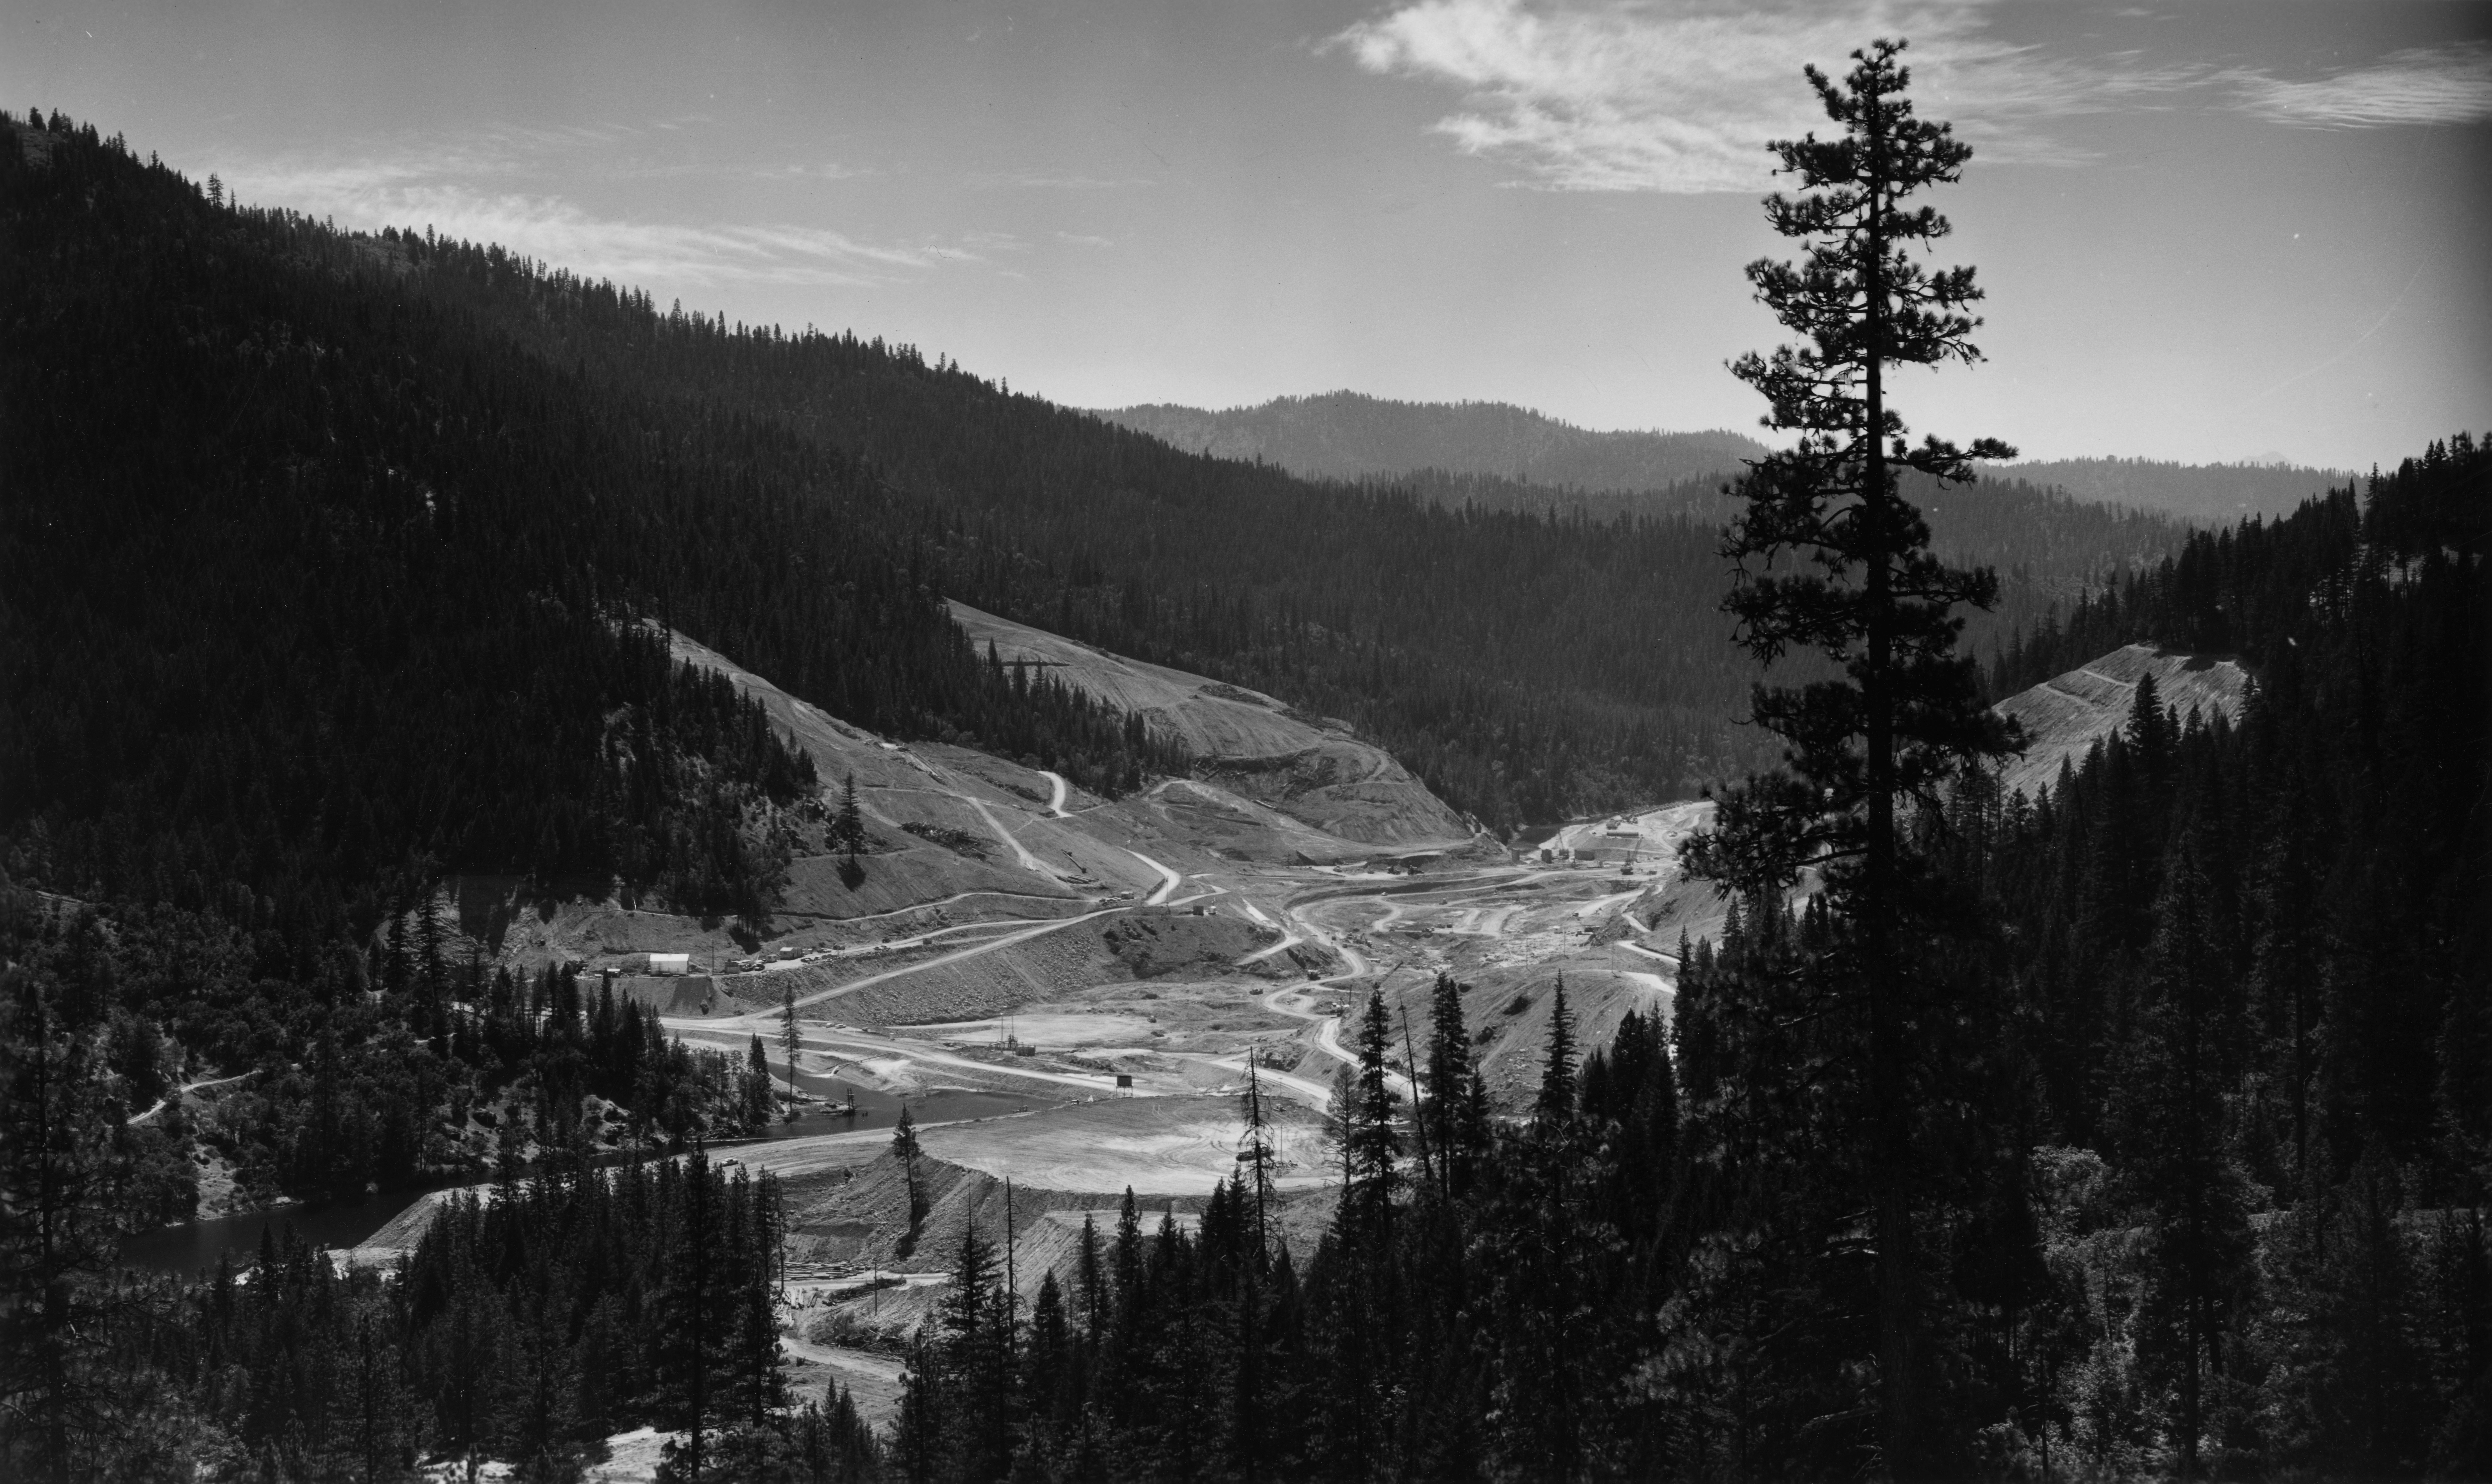 Construction of the Trinity Dam in 1959. Photo by Boni DeCamp and property of DeCamp Family